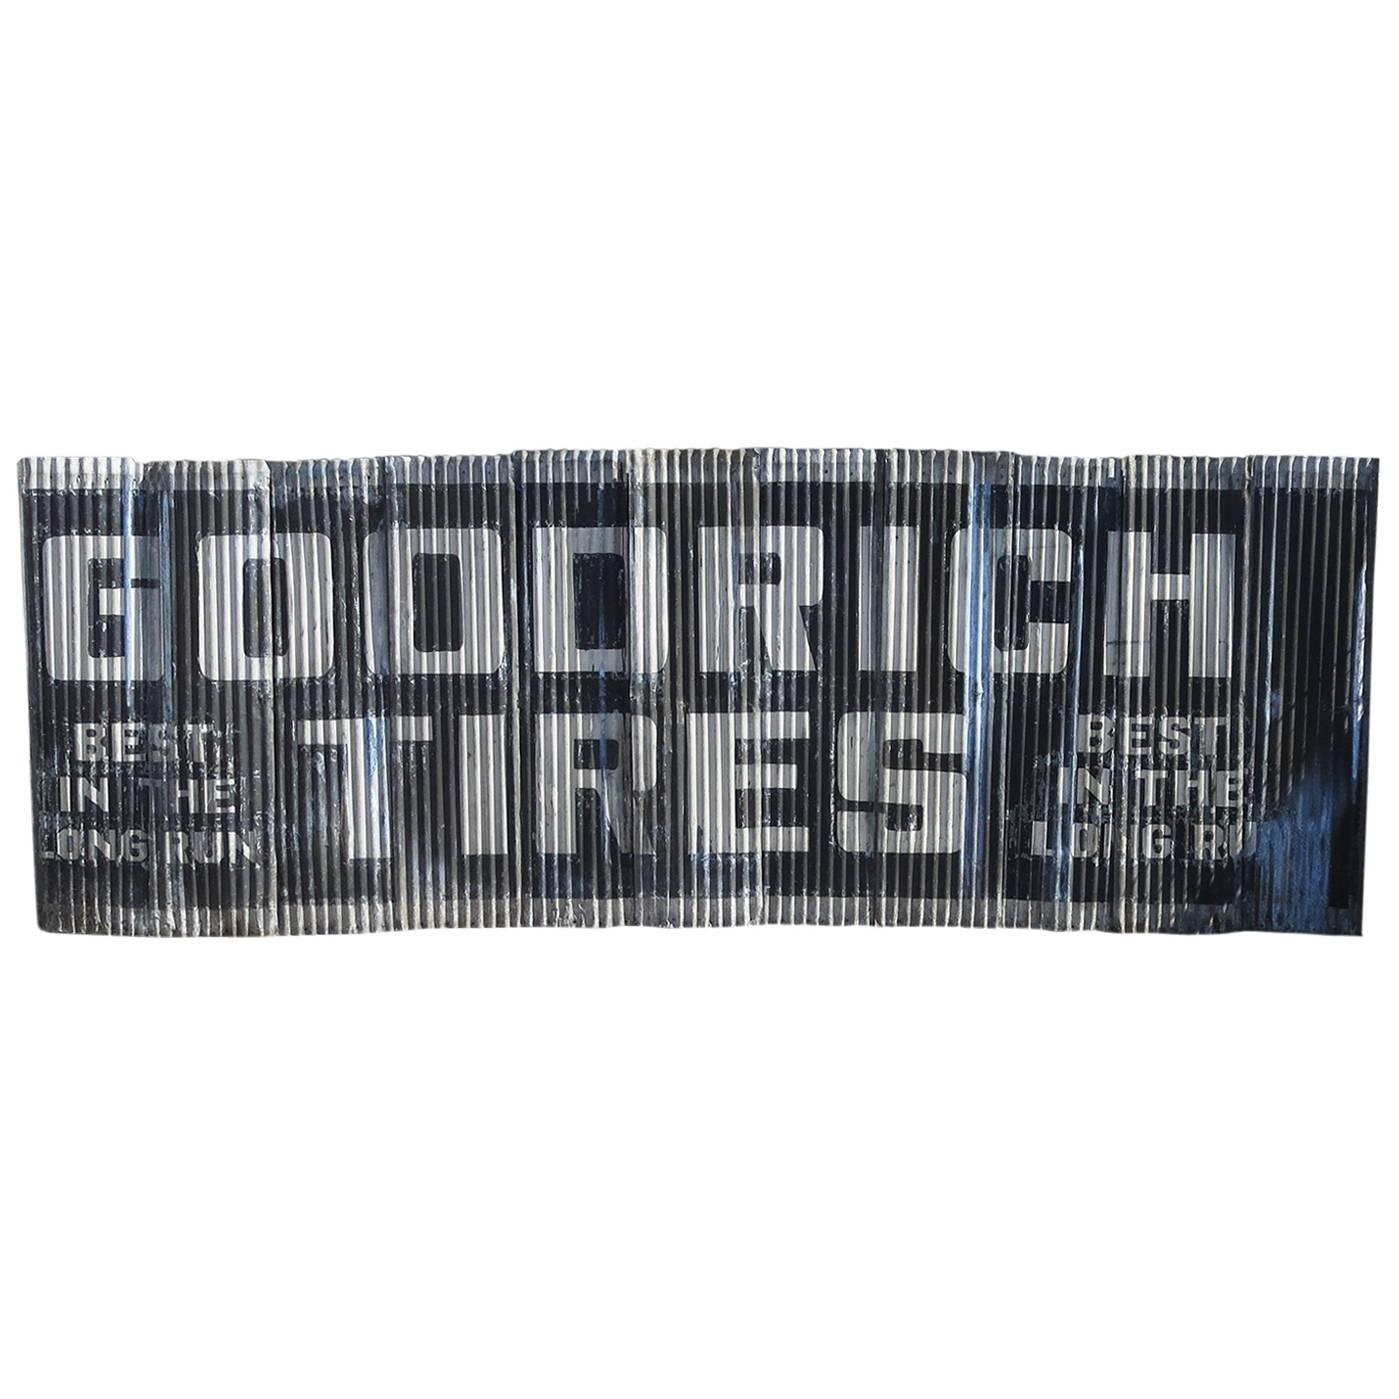 Massive Goodrich Tires Painted Sign on Corrugated Steel Panels